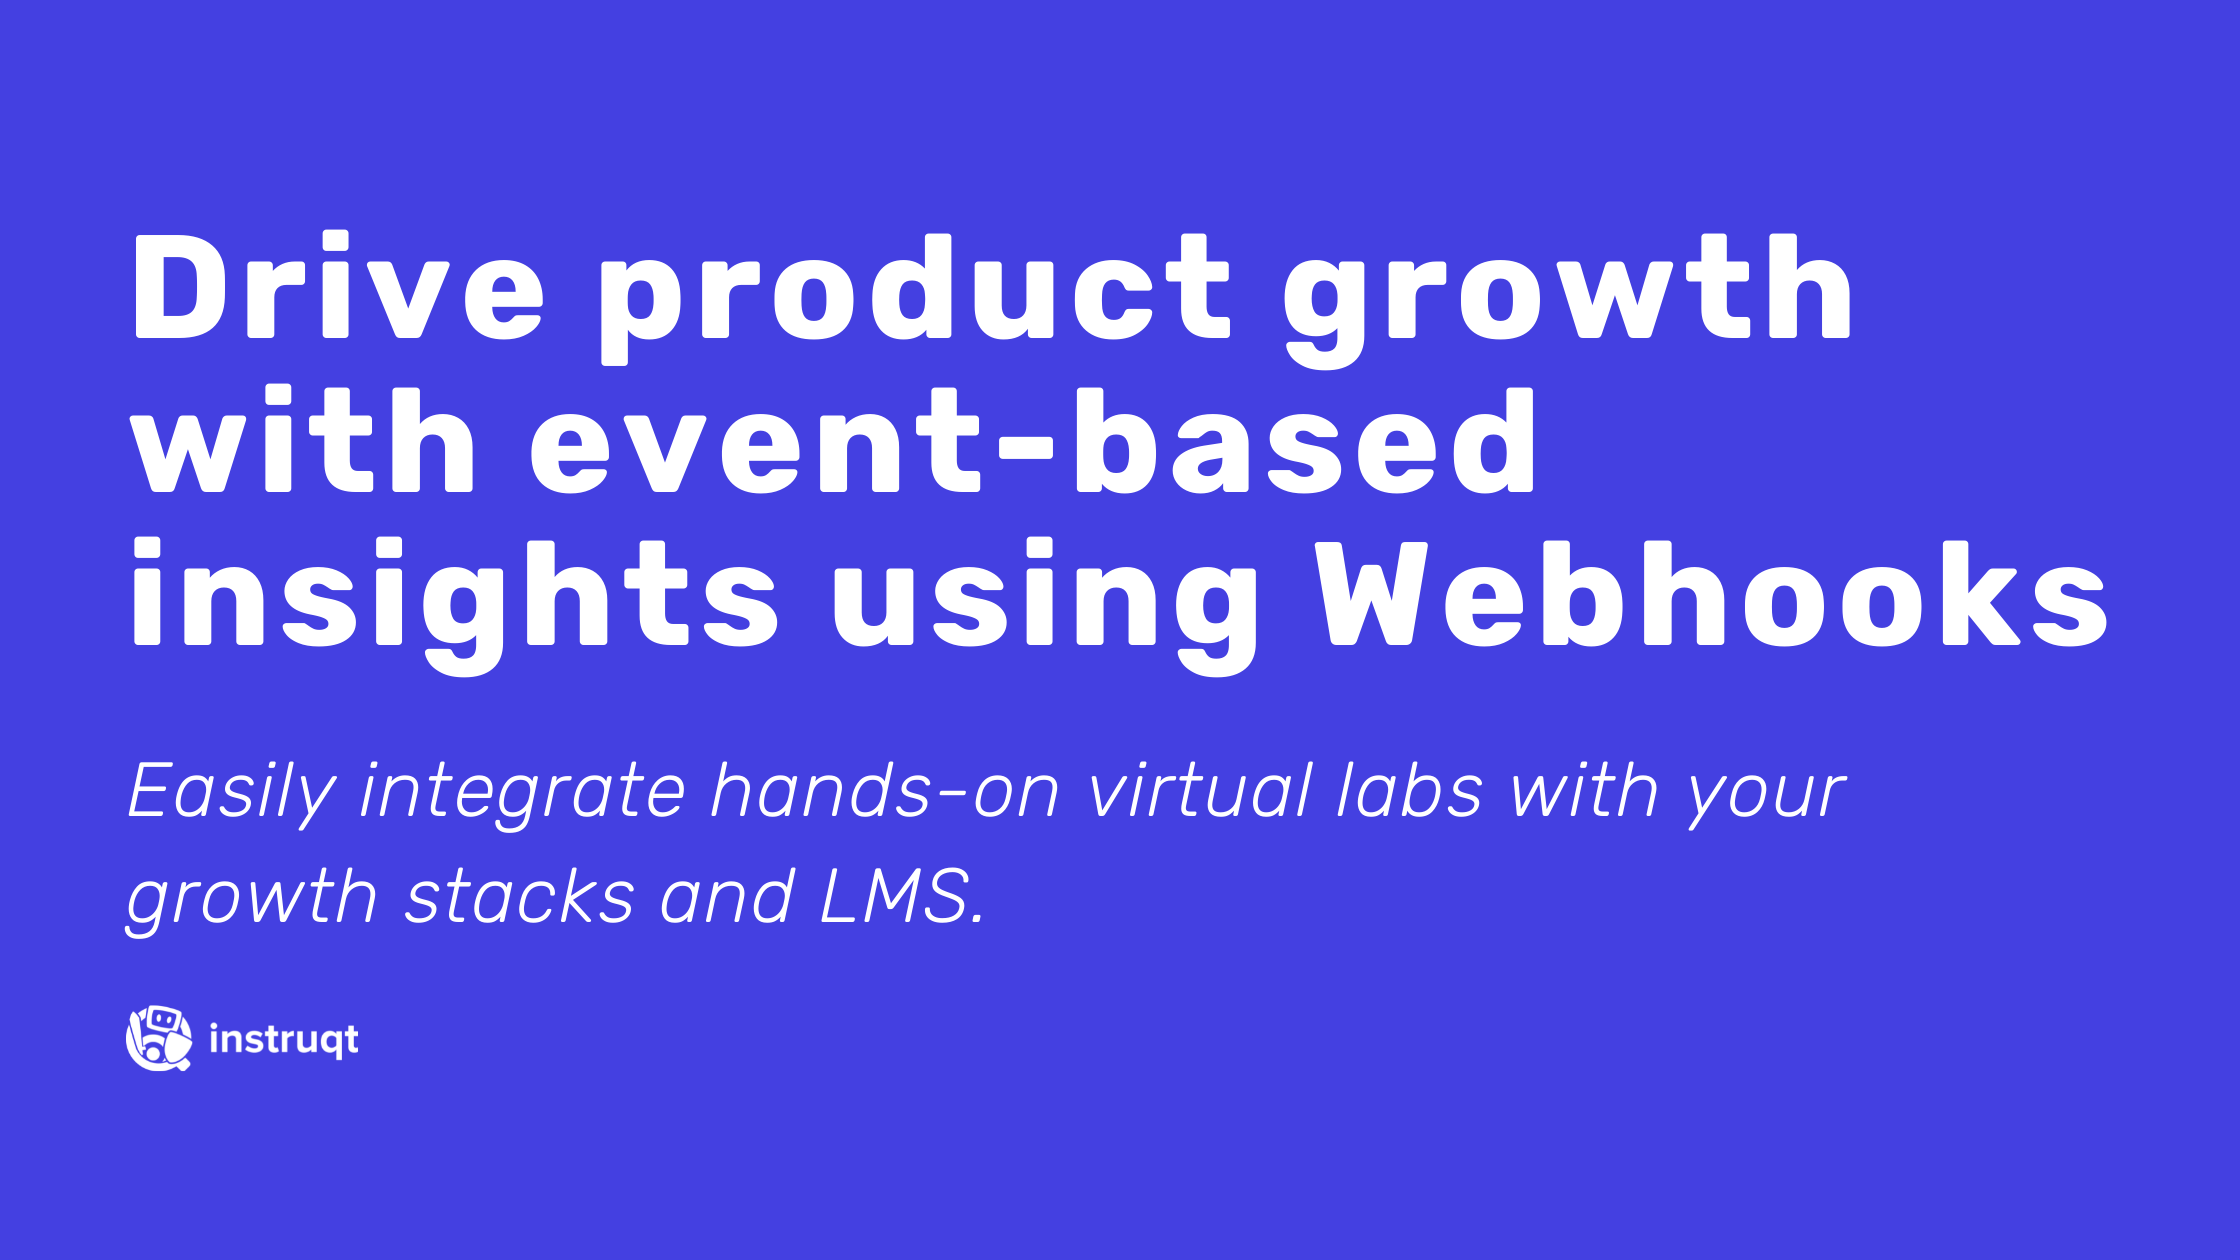 Sell more, market, and train better with extraordinary visibility and insights using webhook integrations on Instruqt.